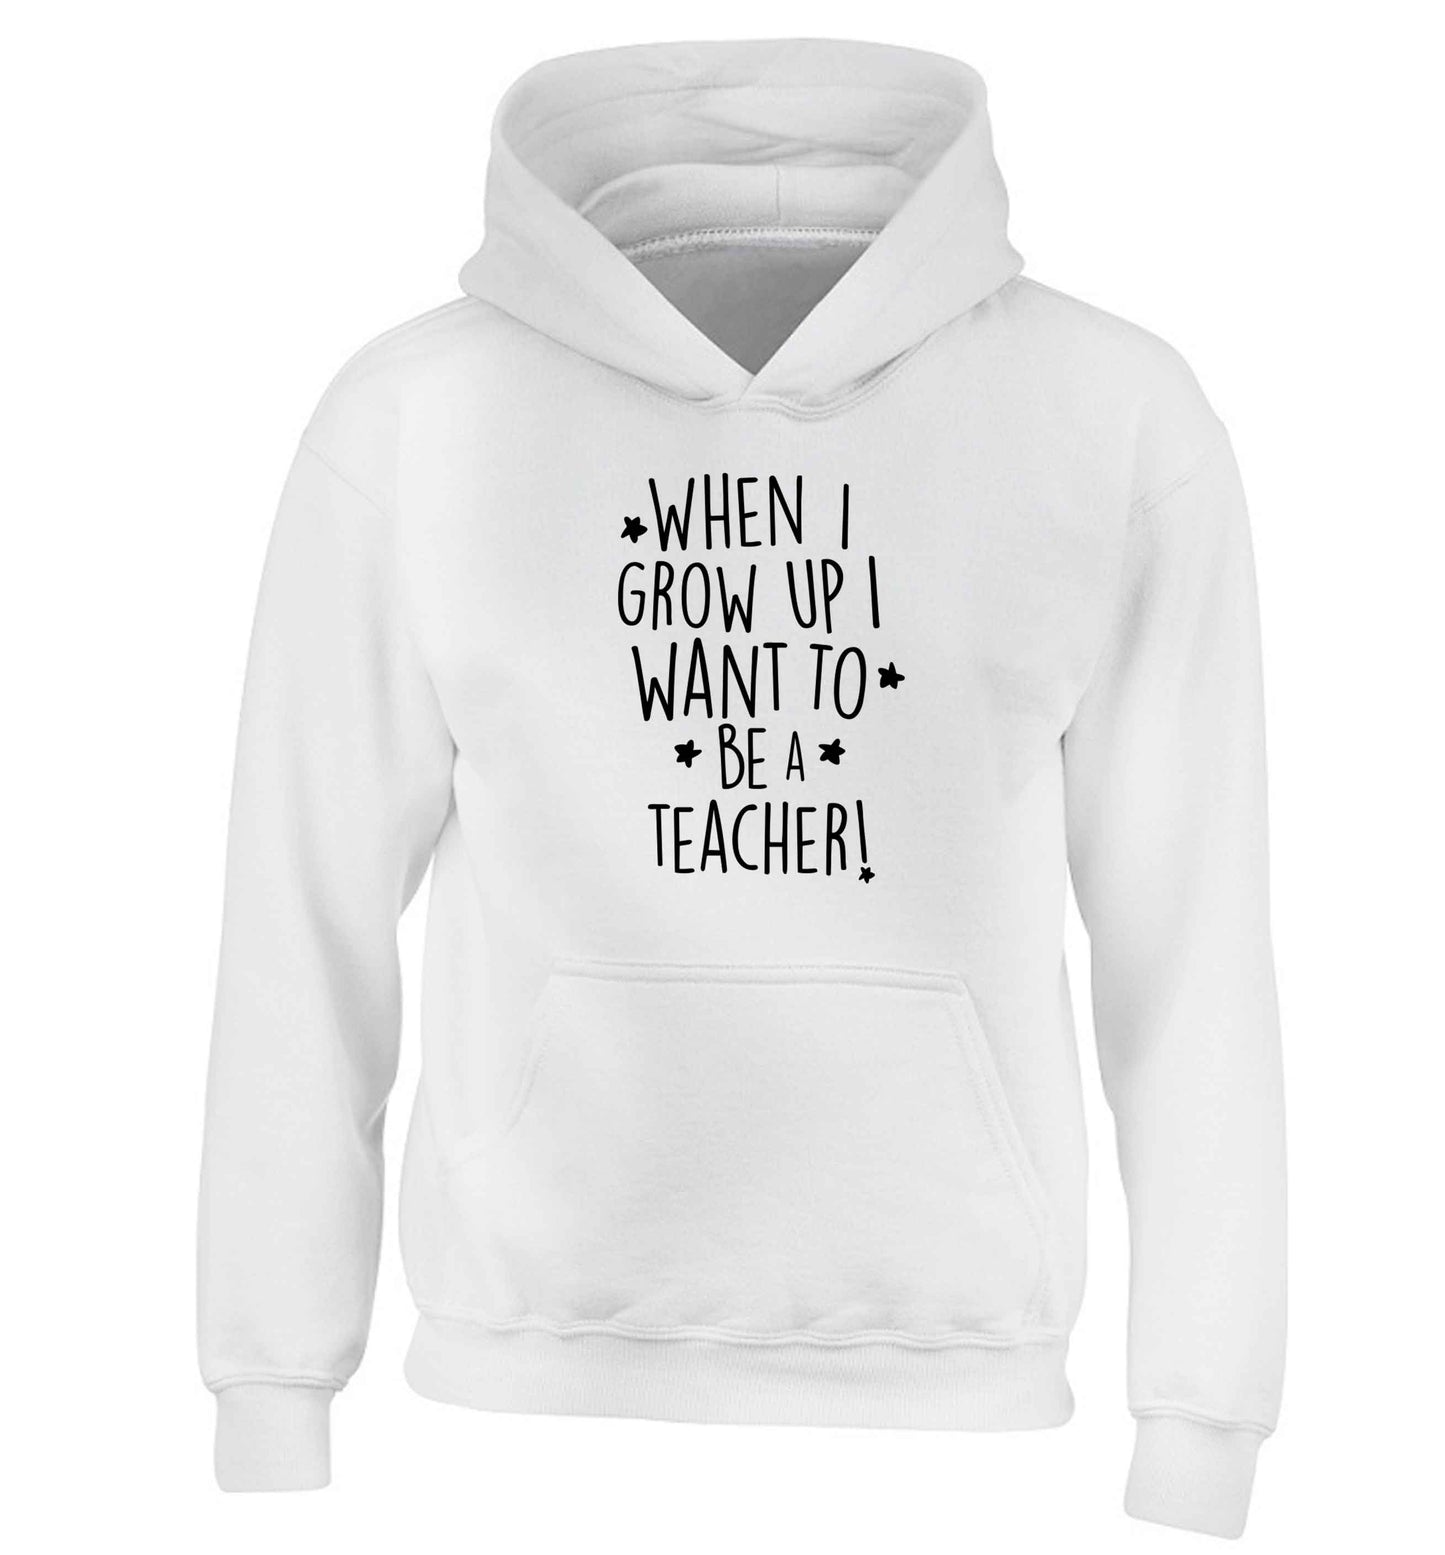 When I grow up I want to be a teacher children's white hoodie 12-13 Years